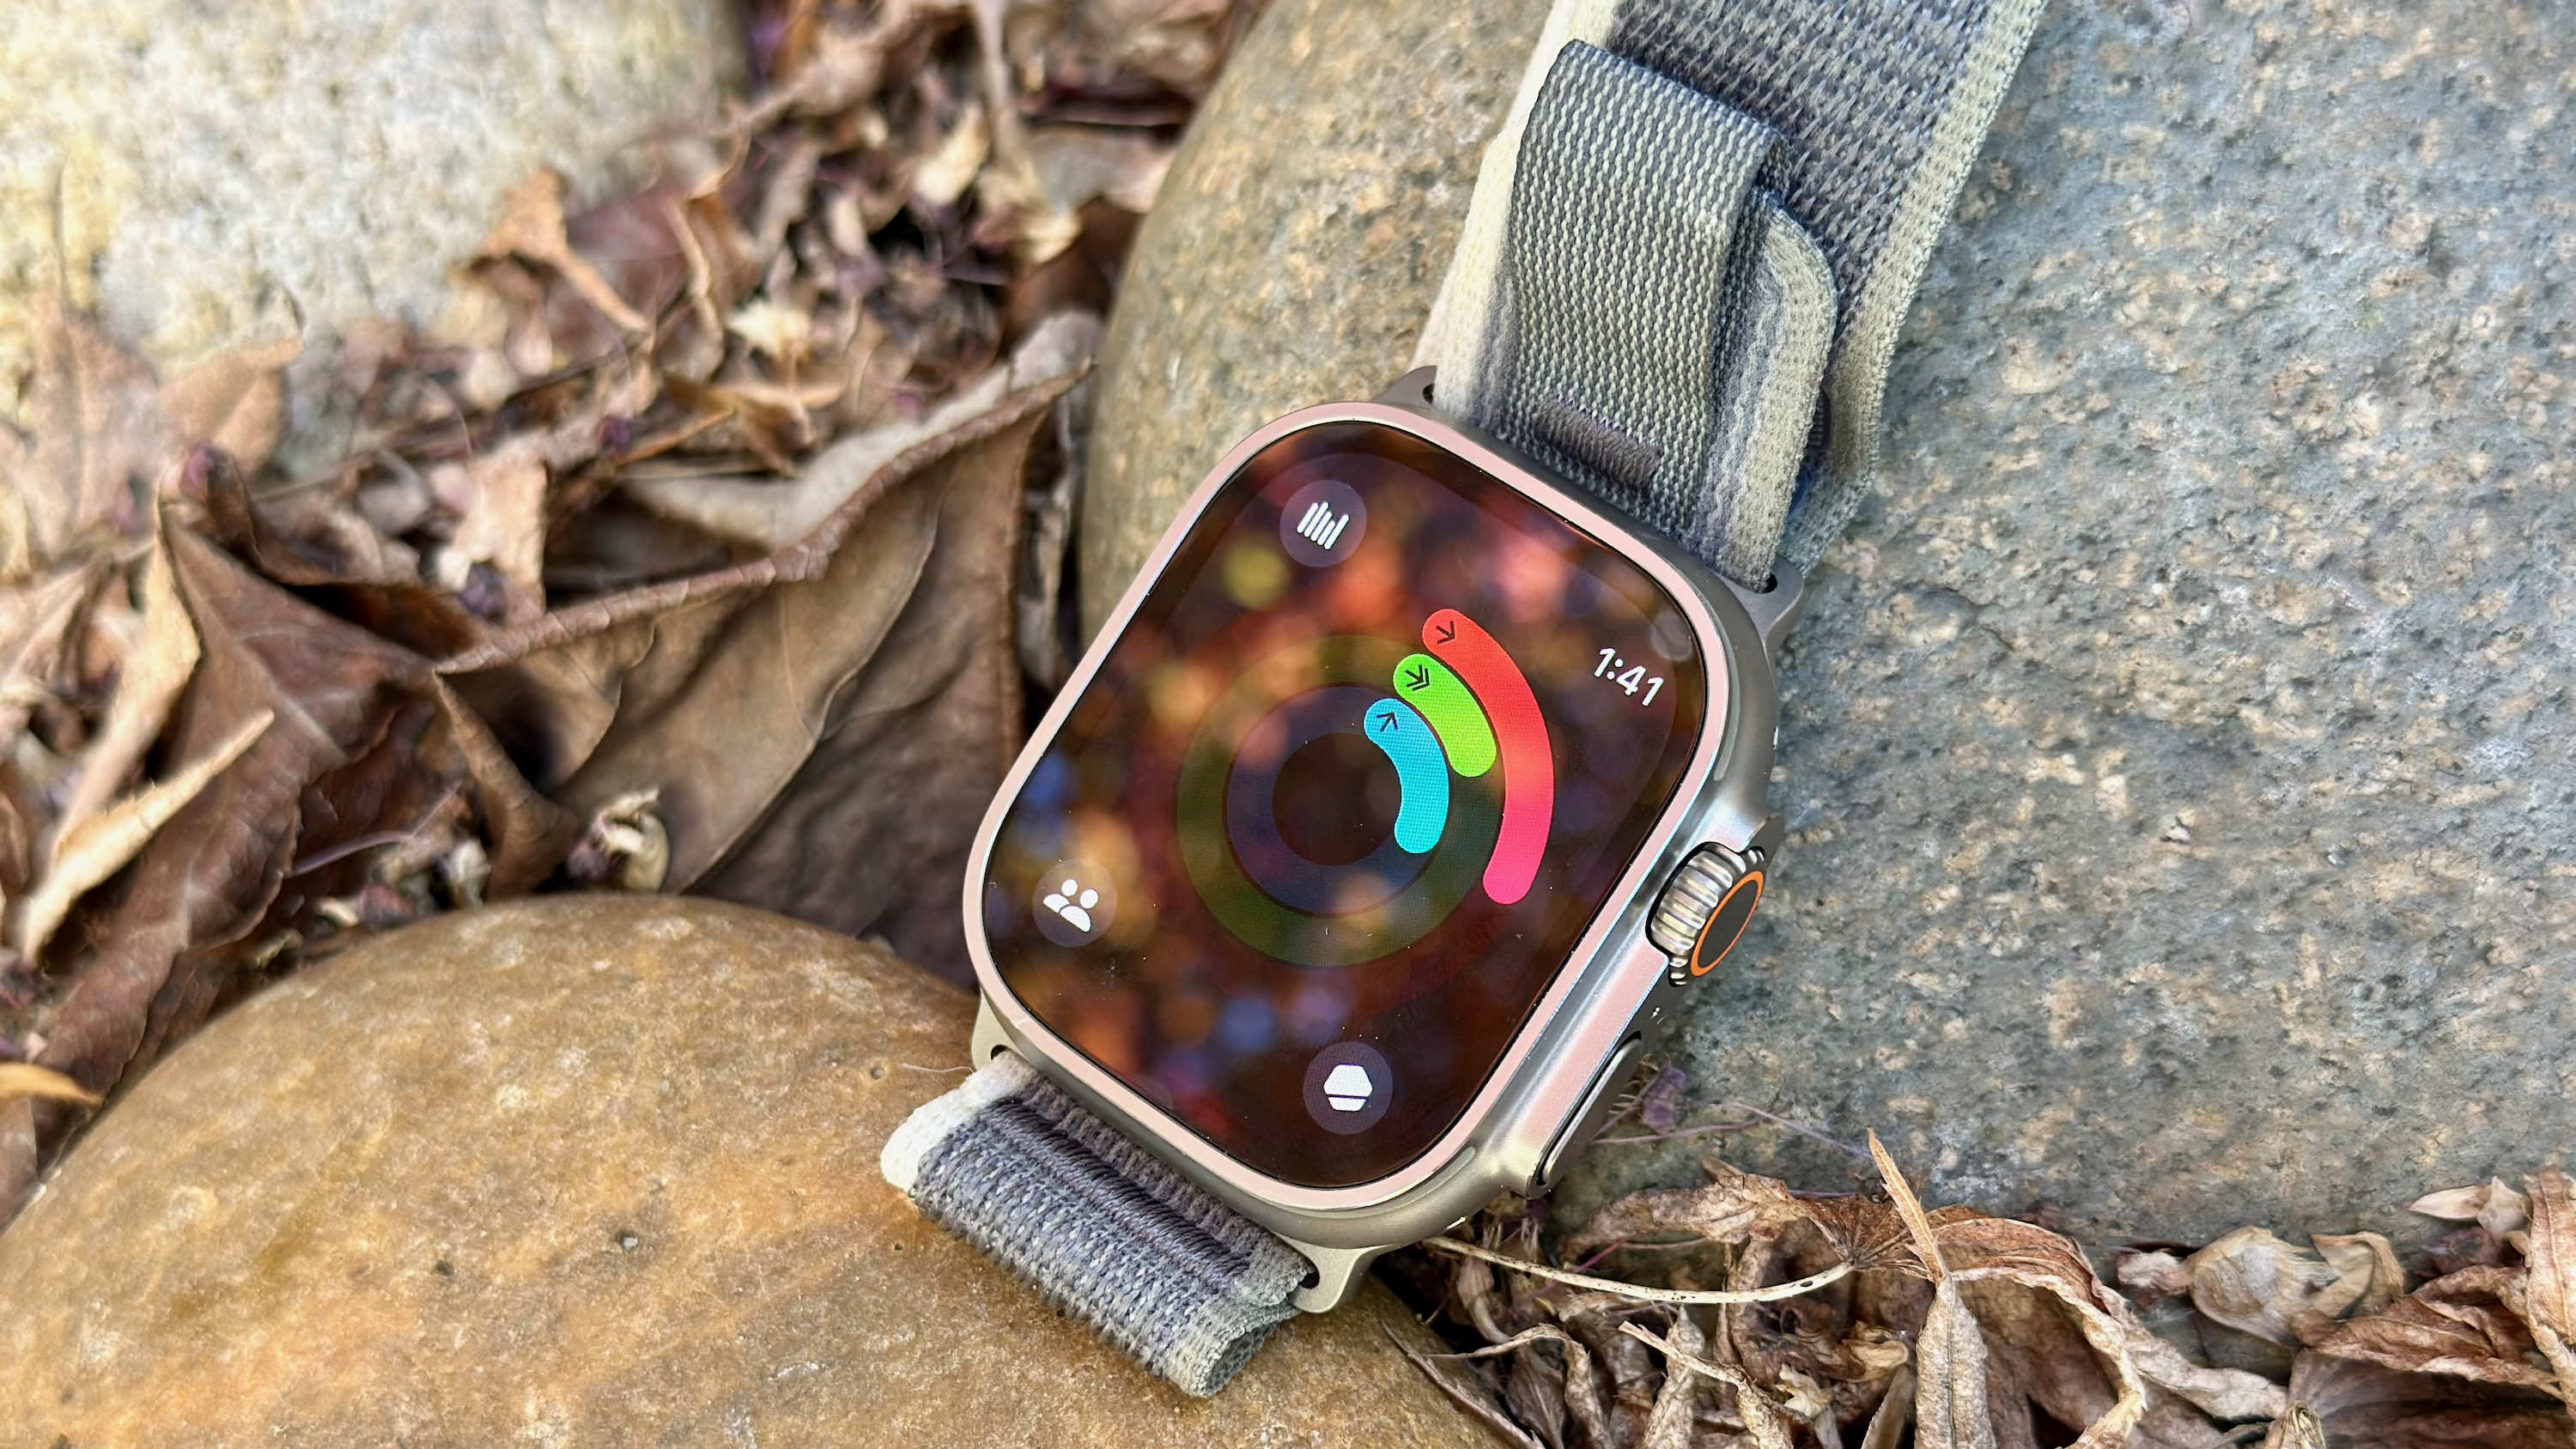 Incomplete activity rings on the Apple Watch Ultra 2